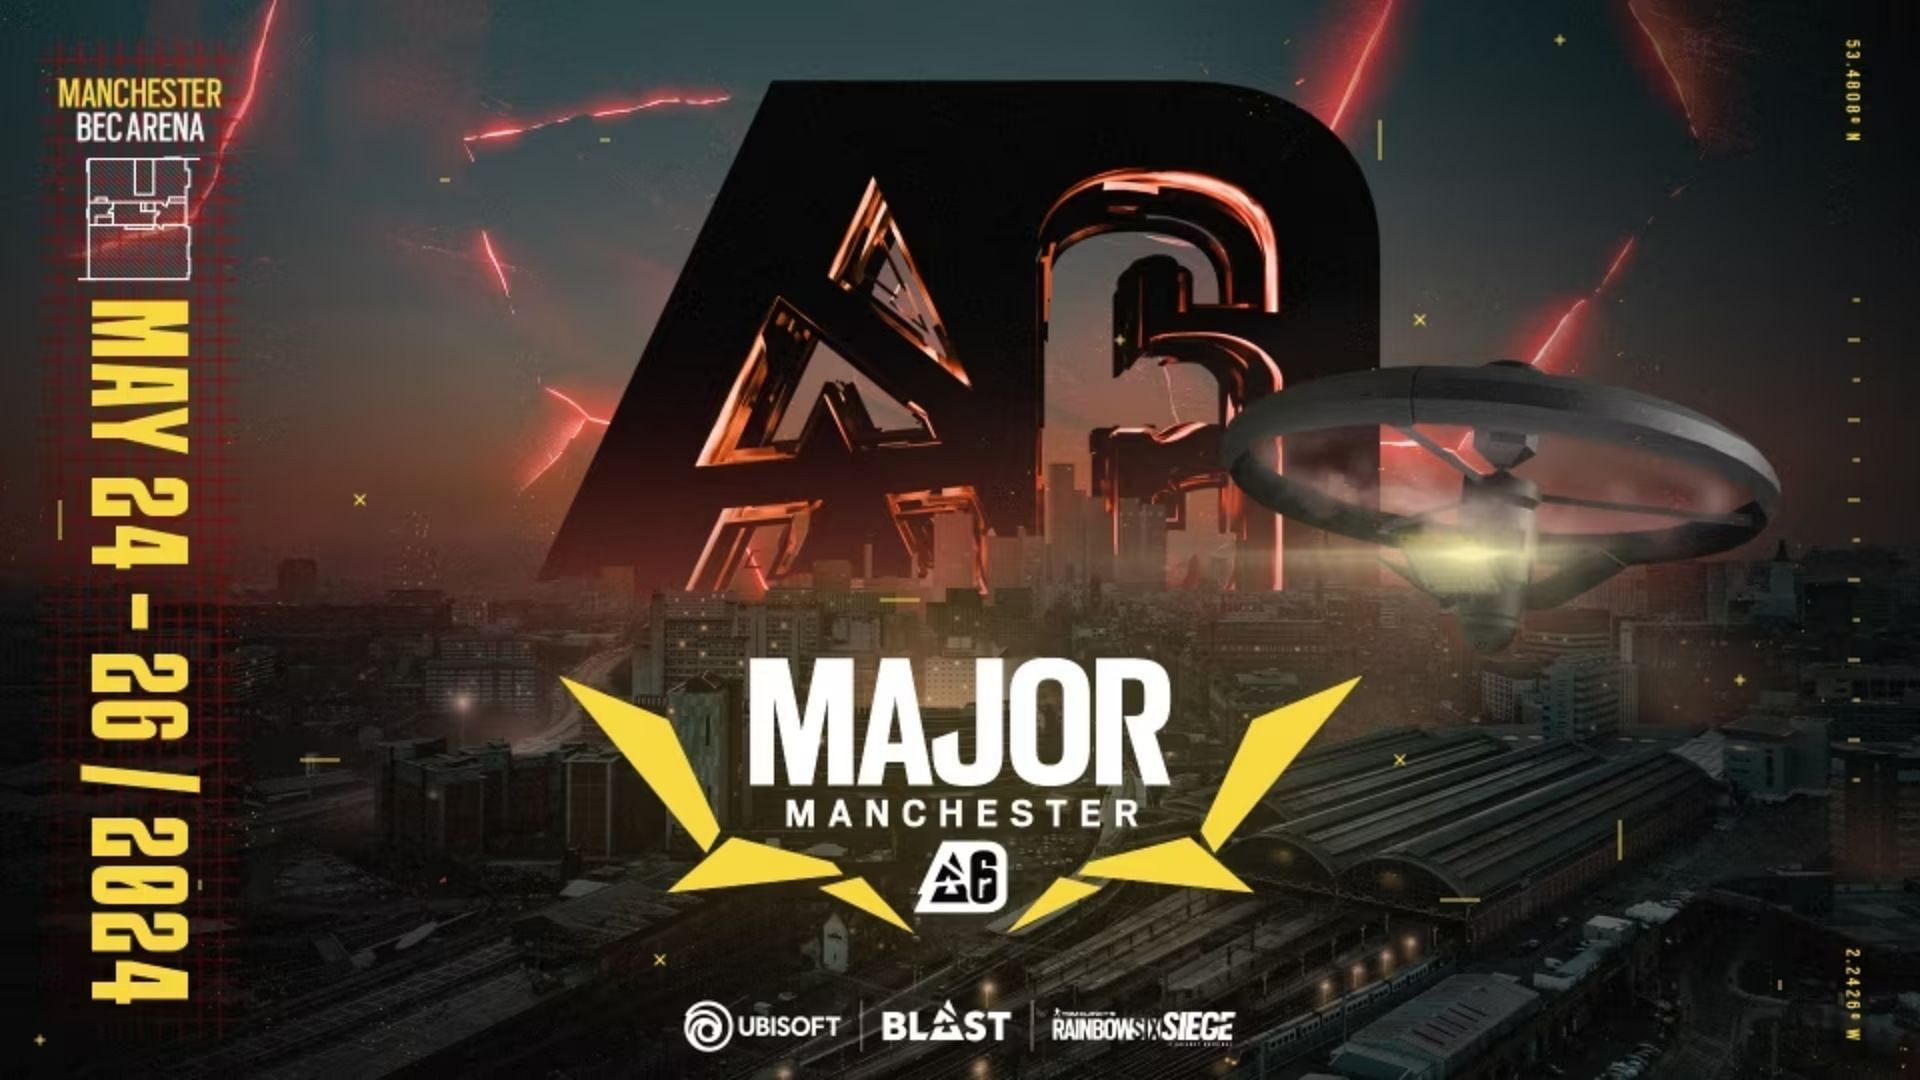 The Blast R6 Major is going to Manchester this year